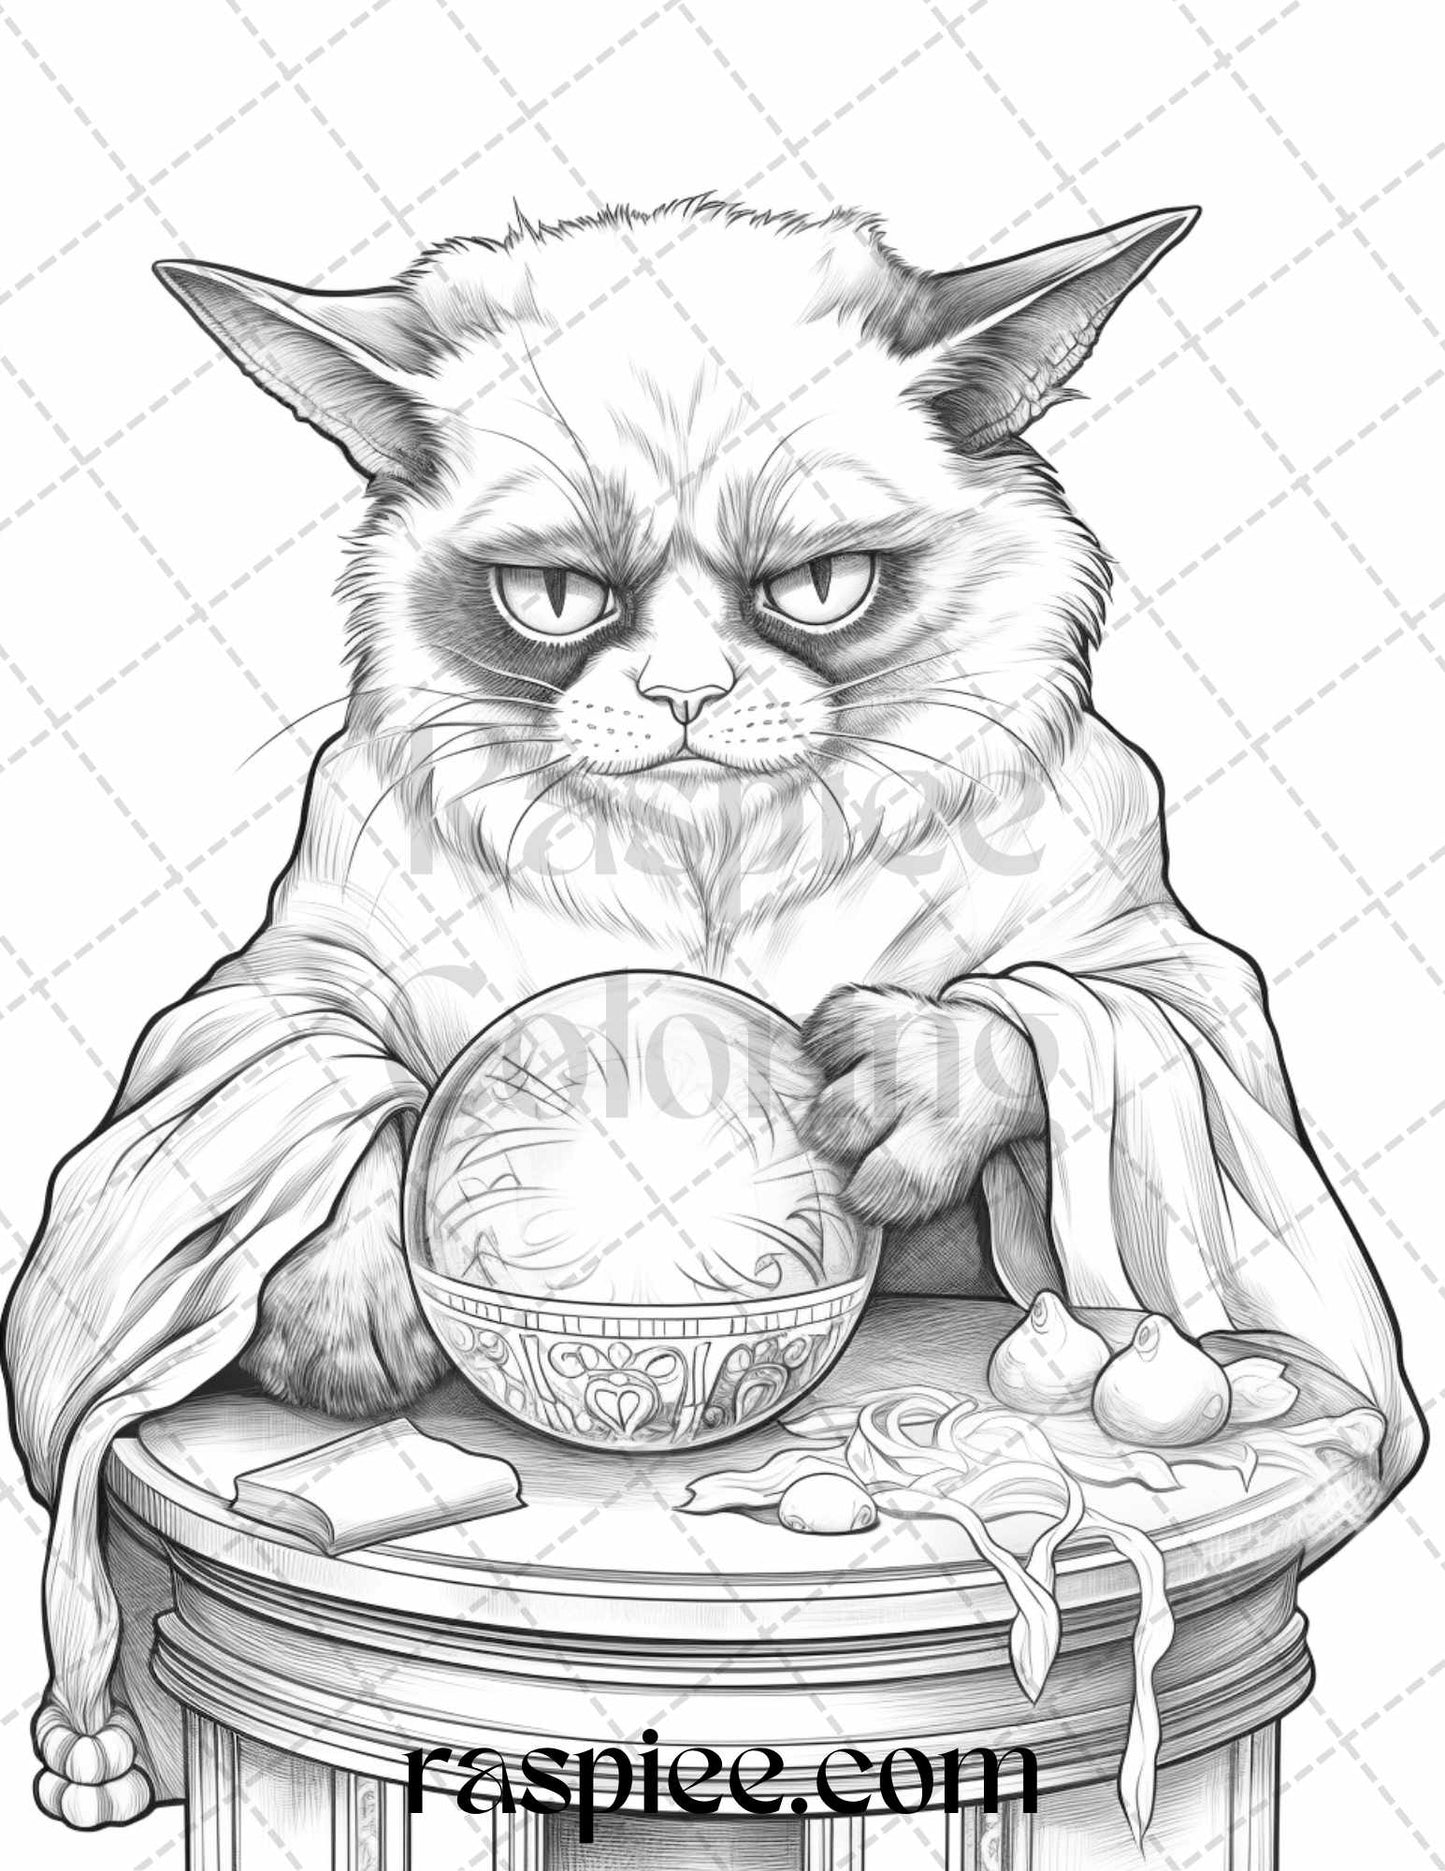 50 Grumpy Cat Grayscale Coloring Pages Printable for Adults, PDF File Instant Download